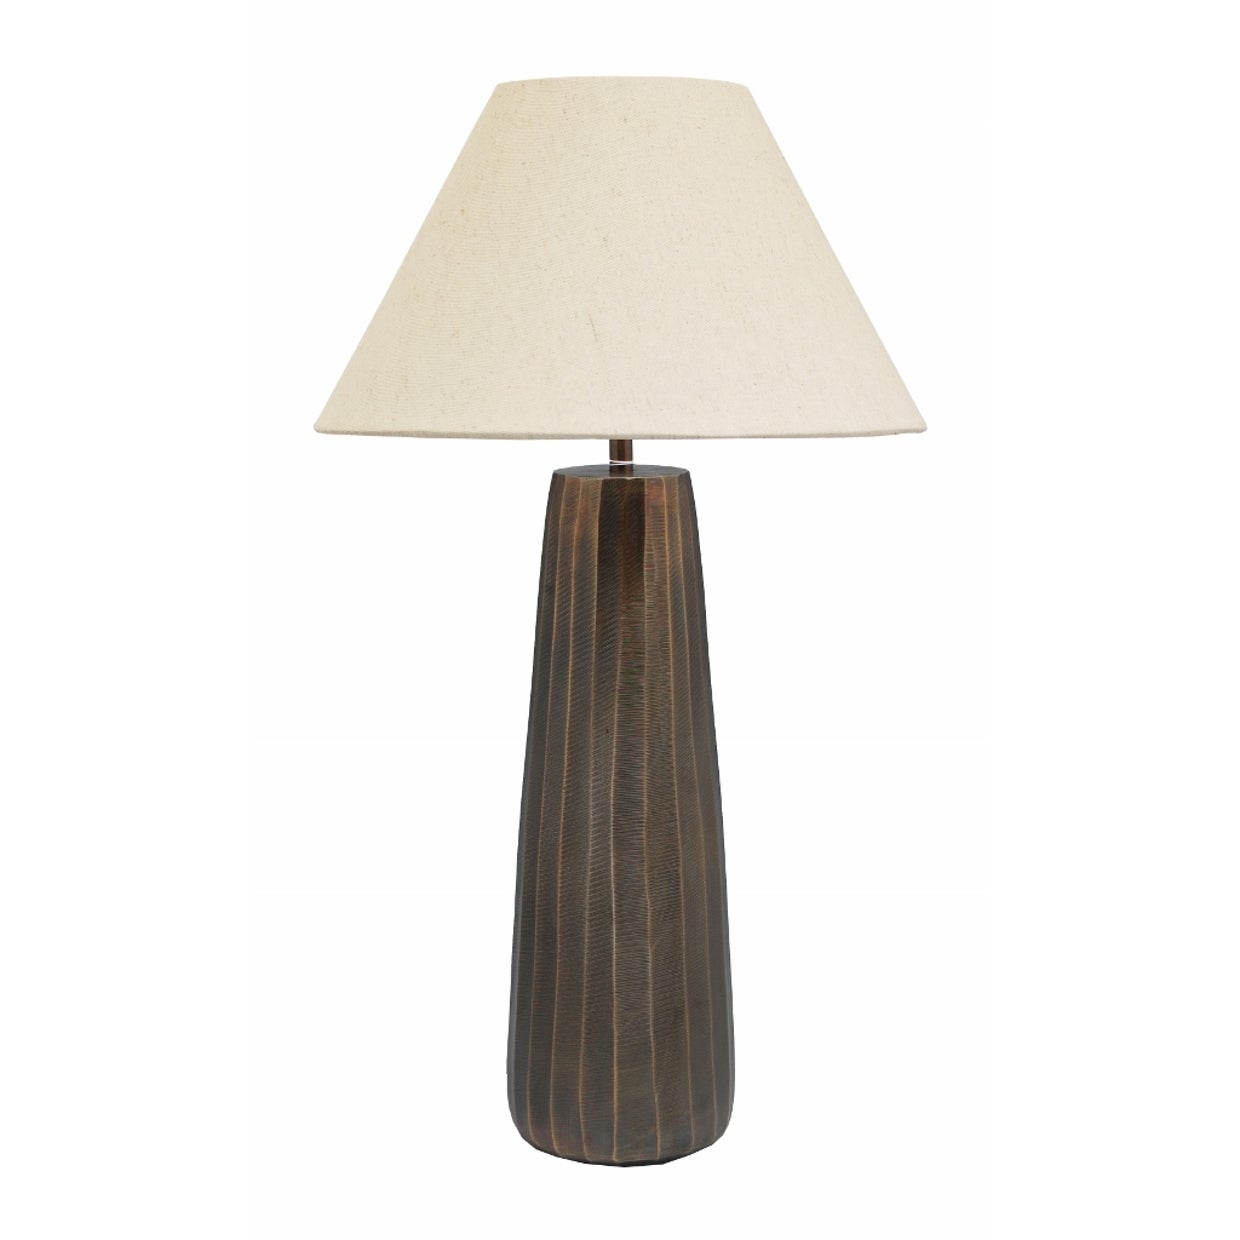 LUGGATE TAPERED LAMP BASE IN ANTIQUE BRASS FINISH